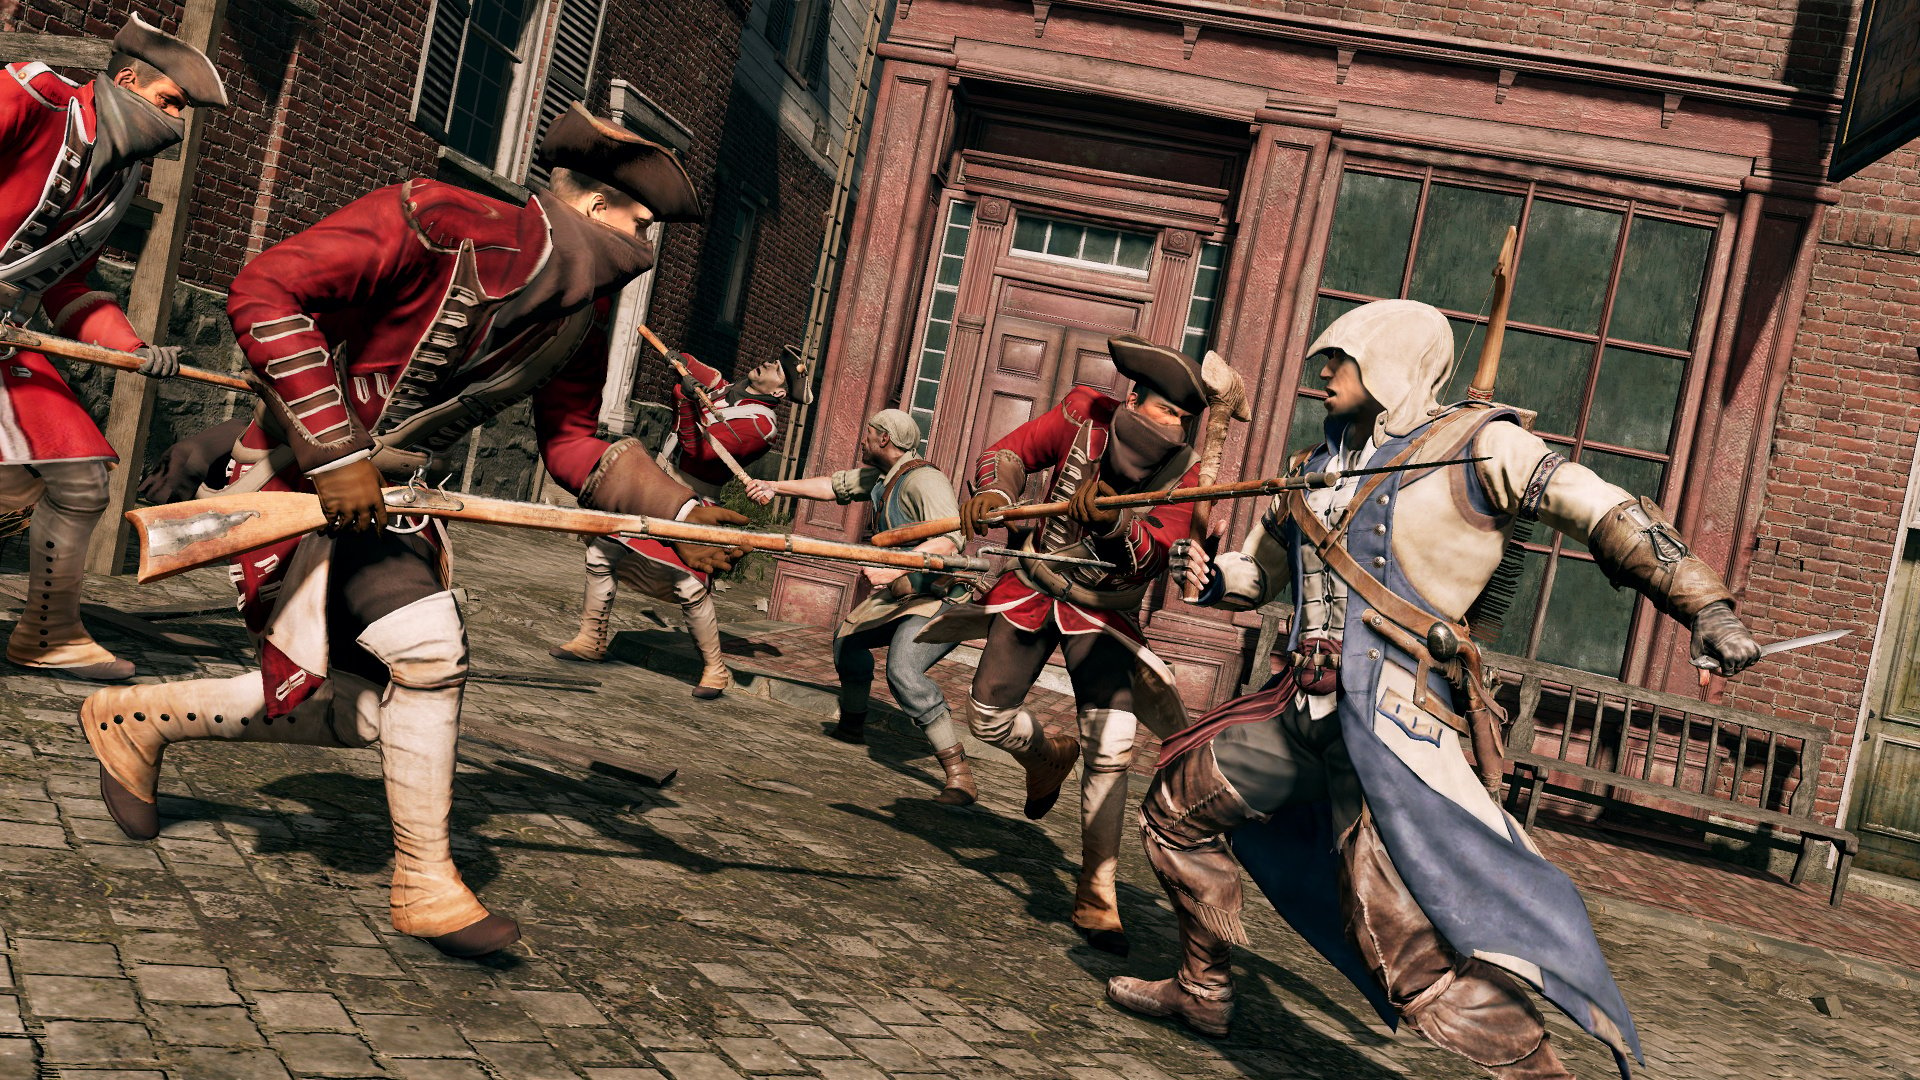 Assassin's Creed III Remastered Review (PS4)